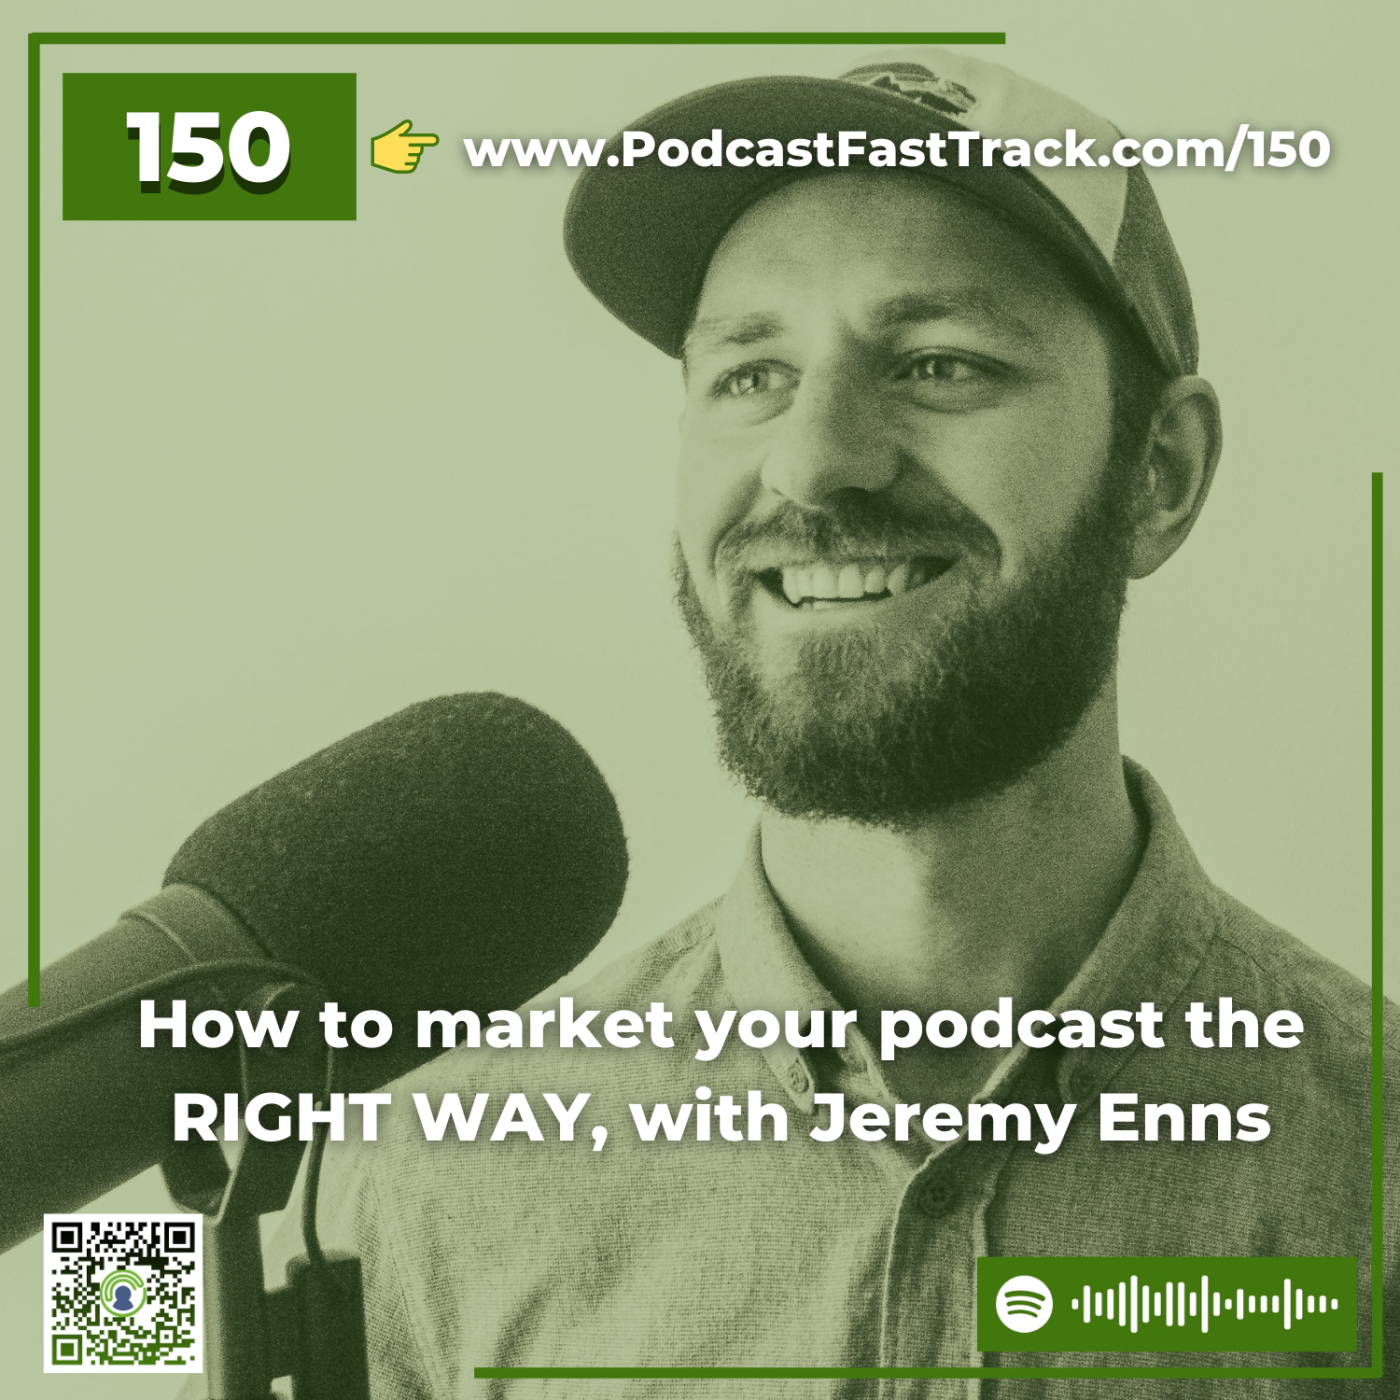 150: Marketing Your Podcast And Growing Your Audience the RIGHT WAY, with Jeremy Enns